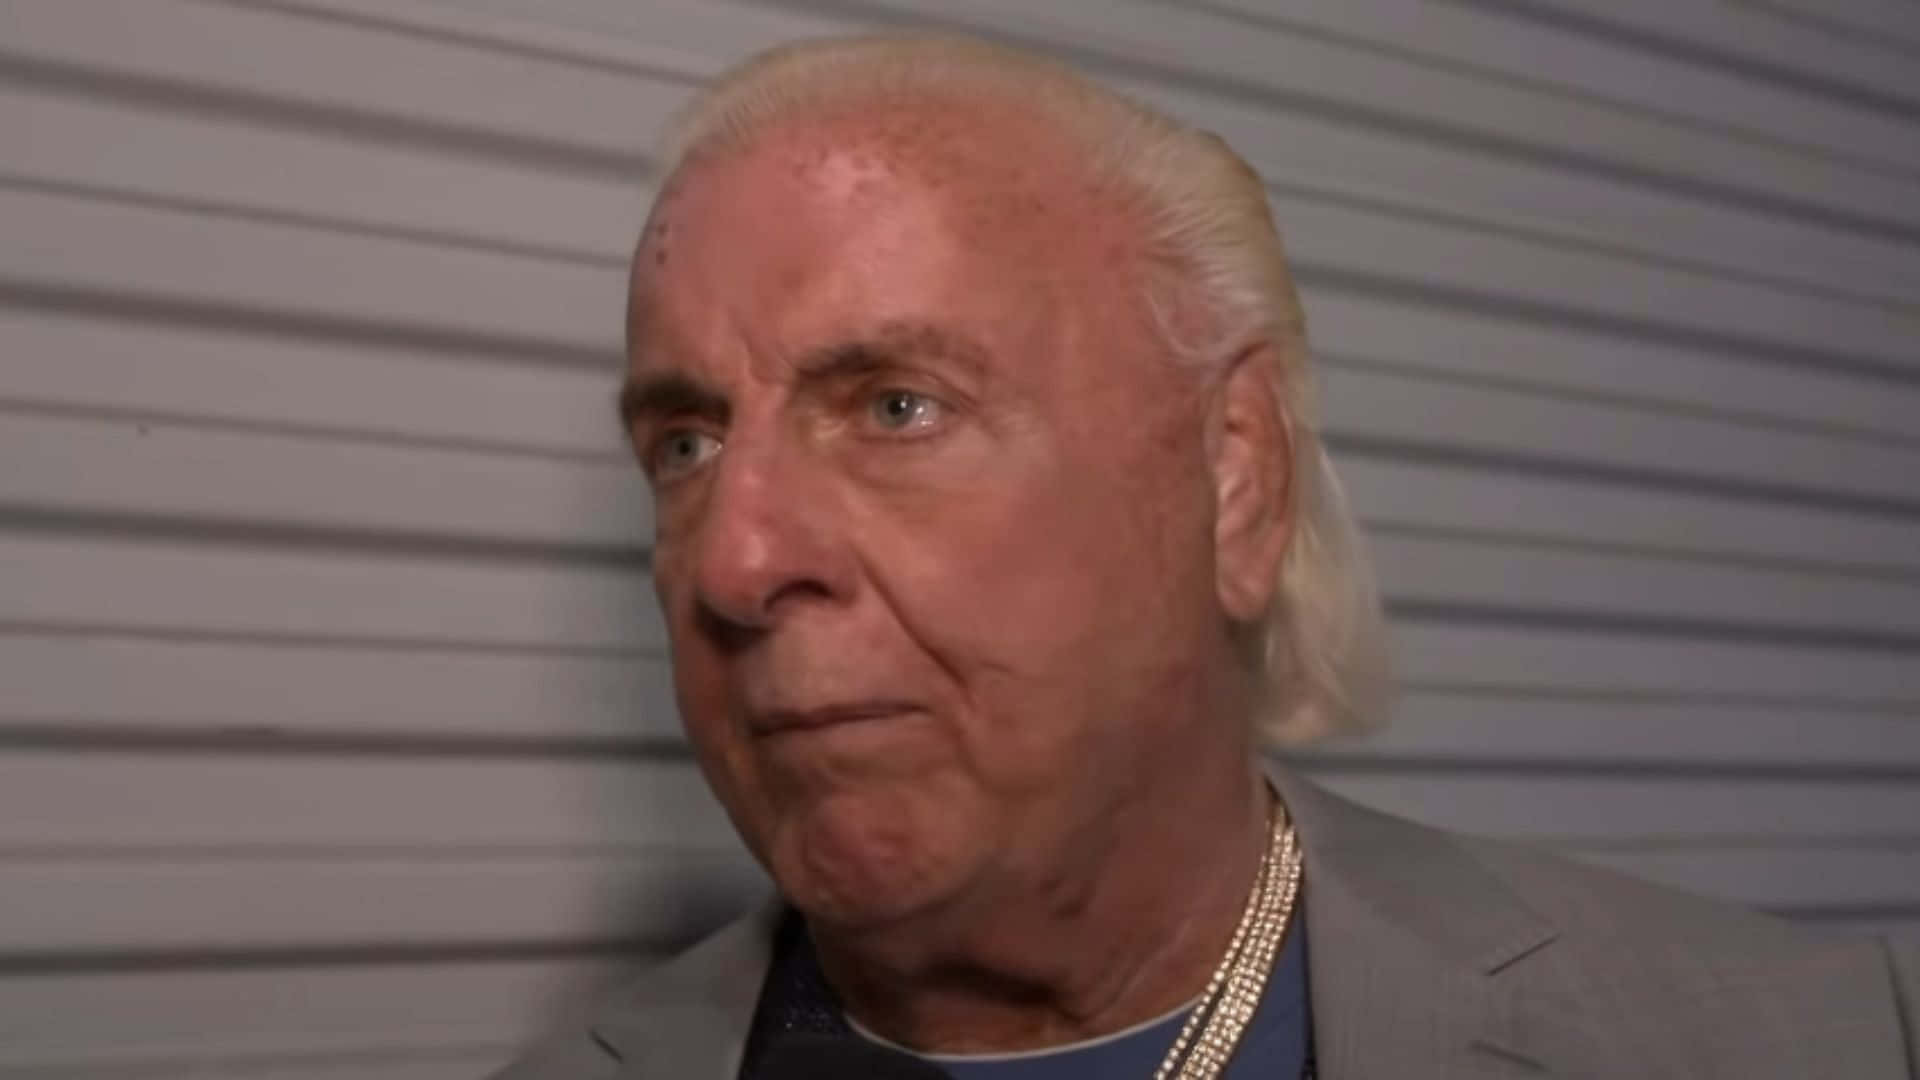 Ric Flair Wearing Grey Suit And Gold Necklace